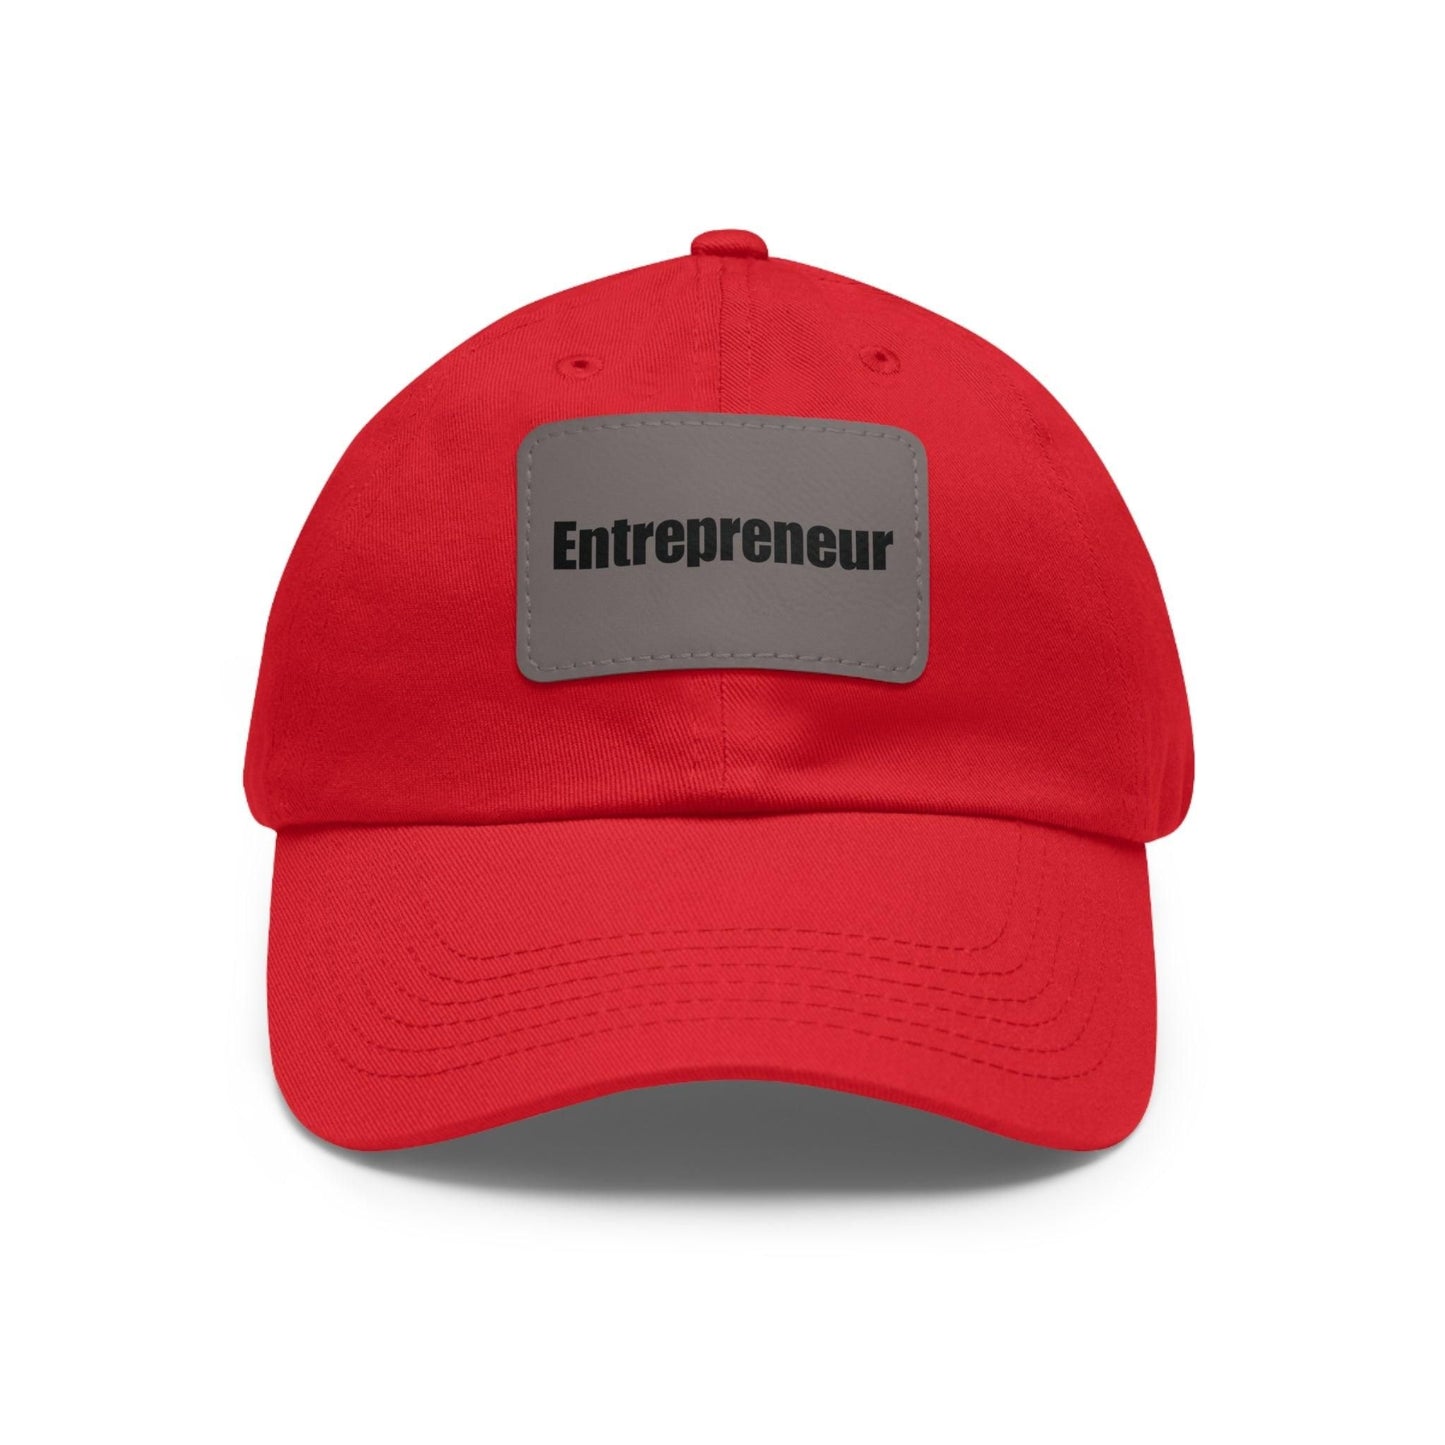 Entrepreneur Baseball Hat with Leather Patch Cap Red / Grey patch Rectangle One size